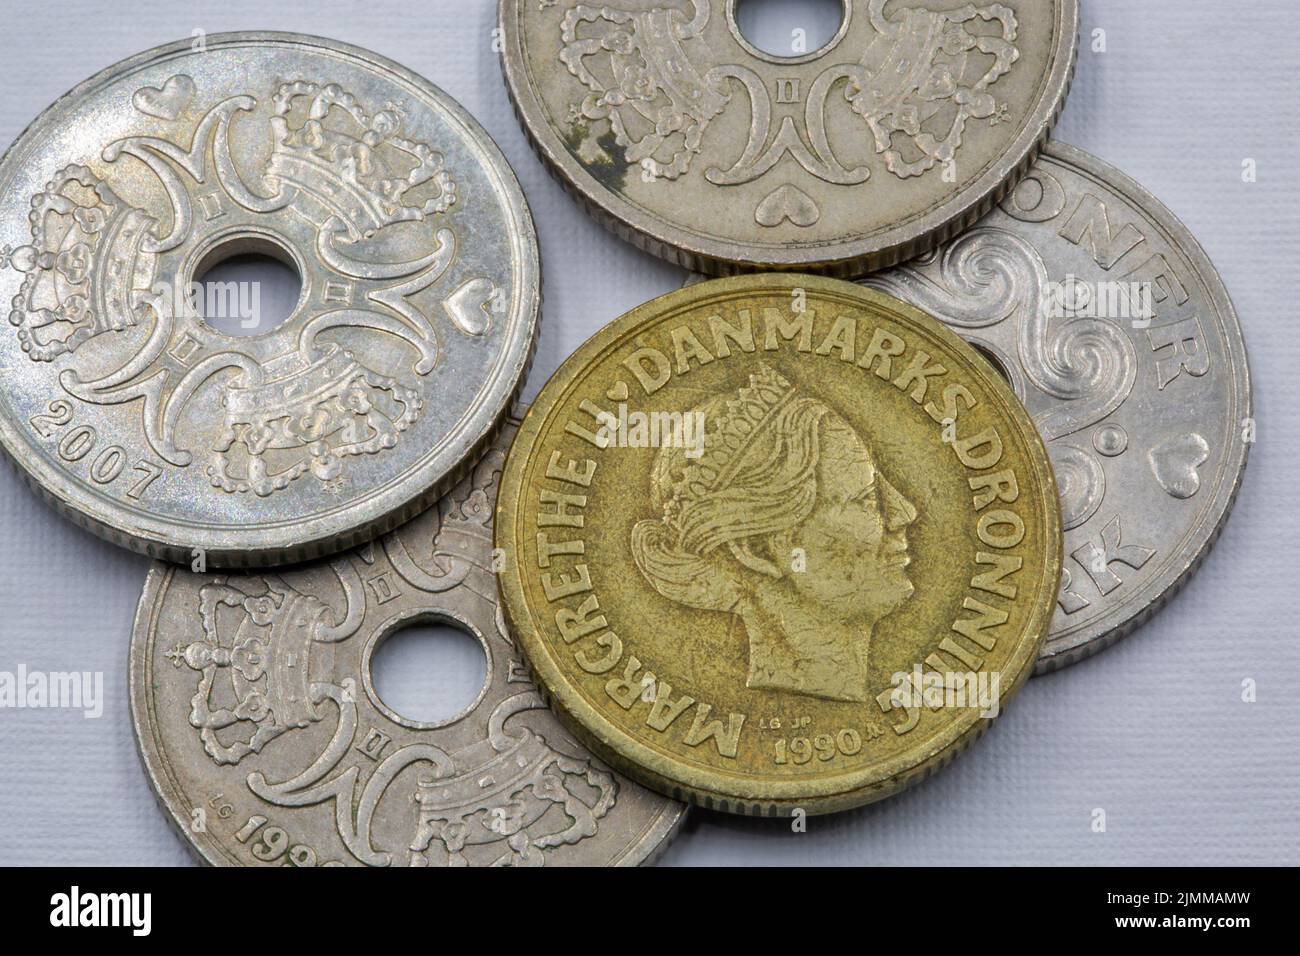 Danish krone coins closeup on white. The krone is the official currency of Denmark, Greenland, and the Faroe Islands, introduced on 1 January 1875. Stock Photo